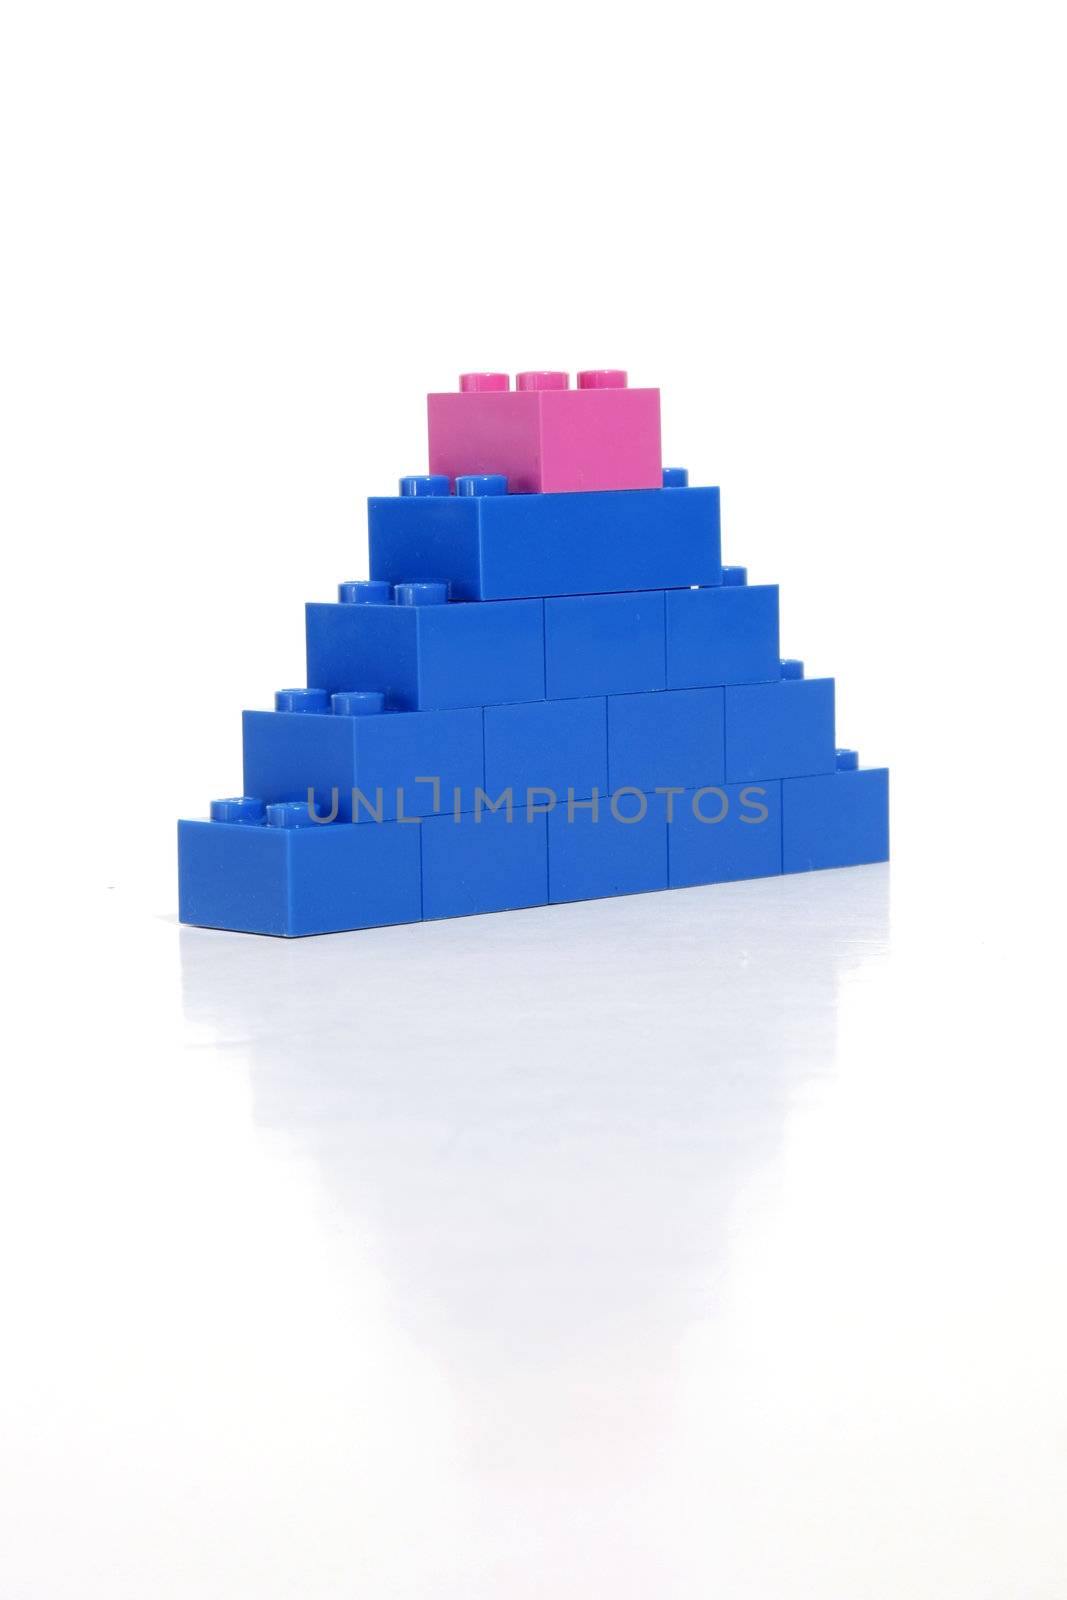 Pink block on top of a blue tower indicates womans strength.